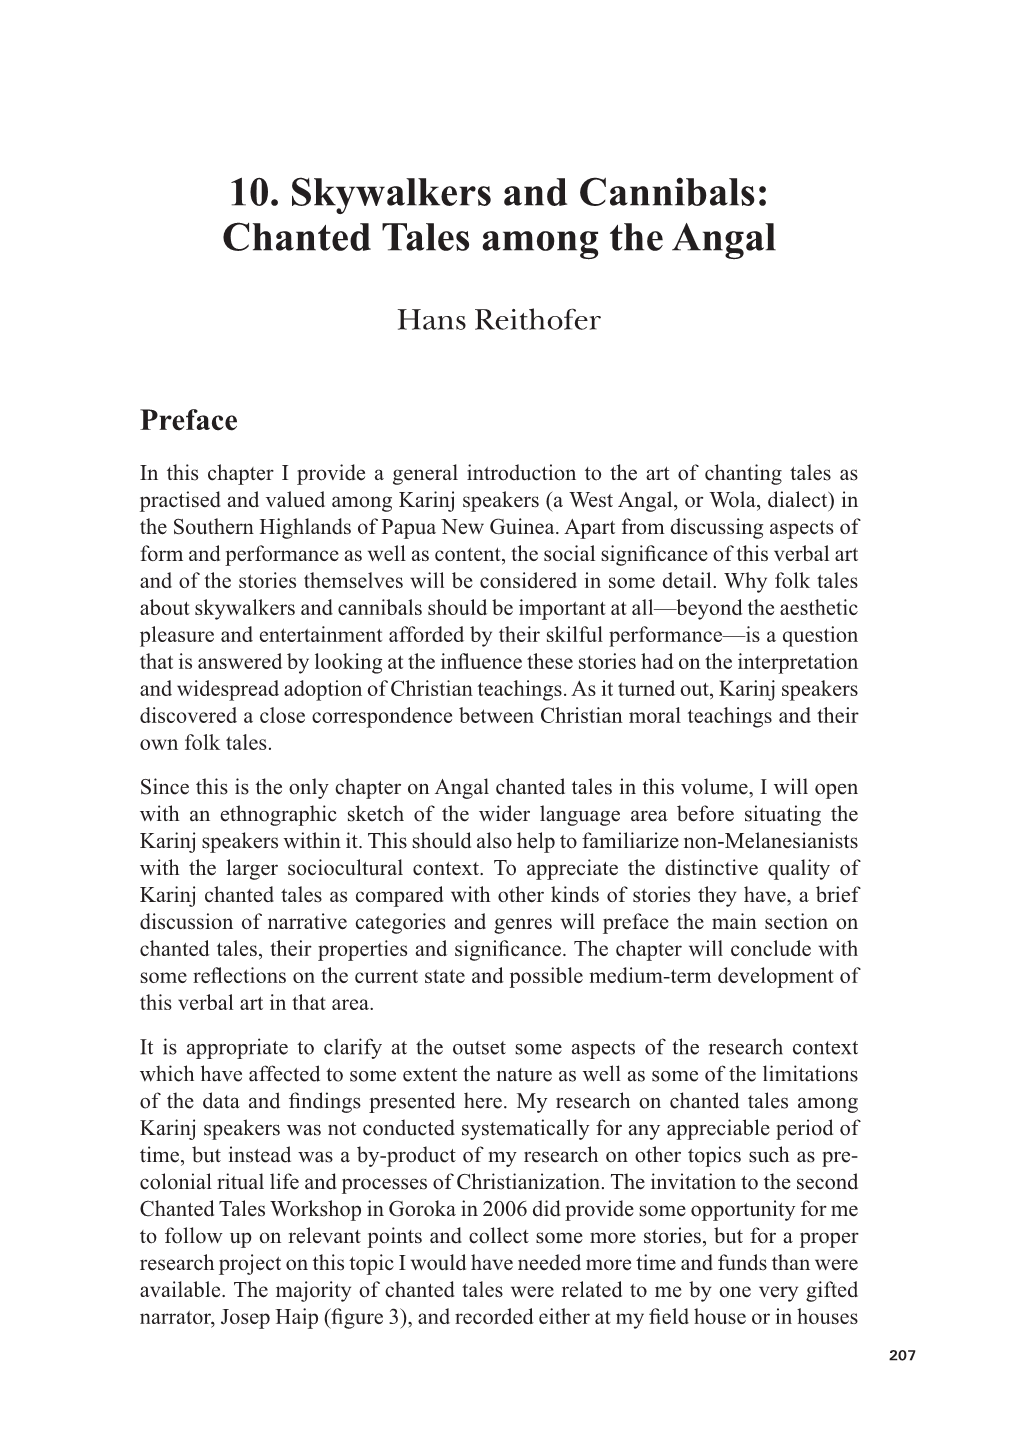 10. Skywalkers and Cannibals: Chanted Tales Among the Angal